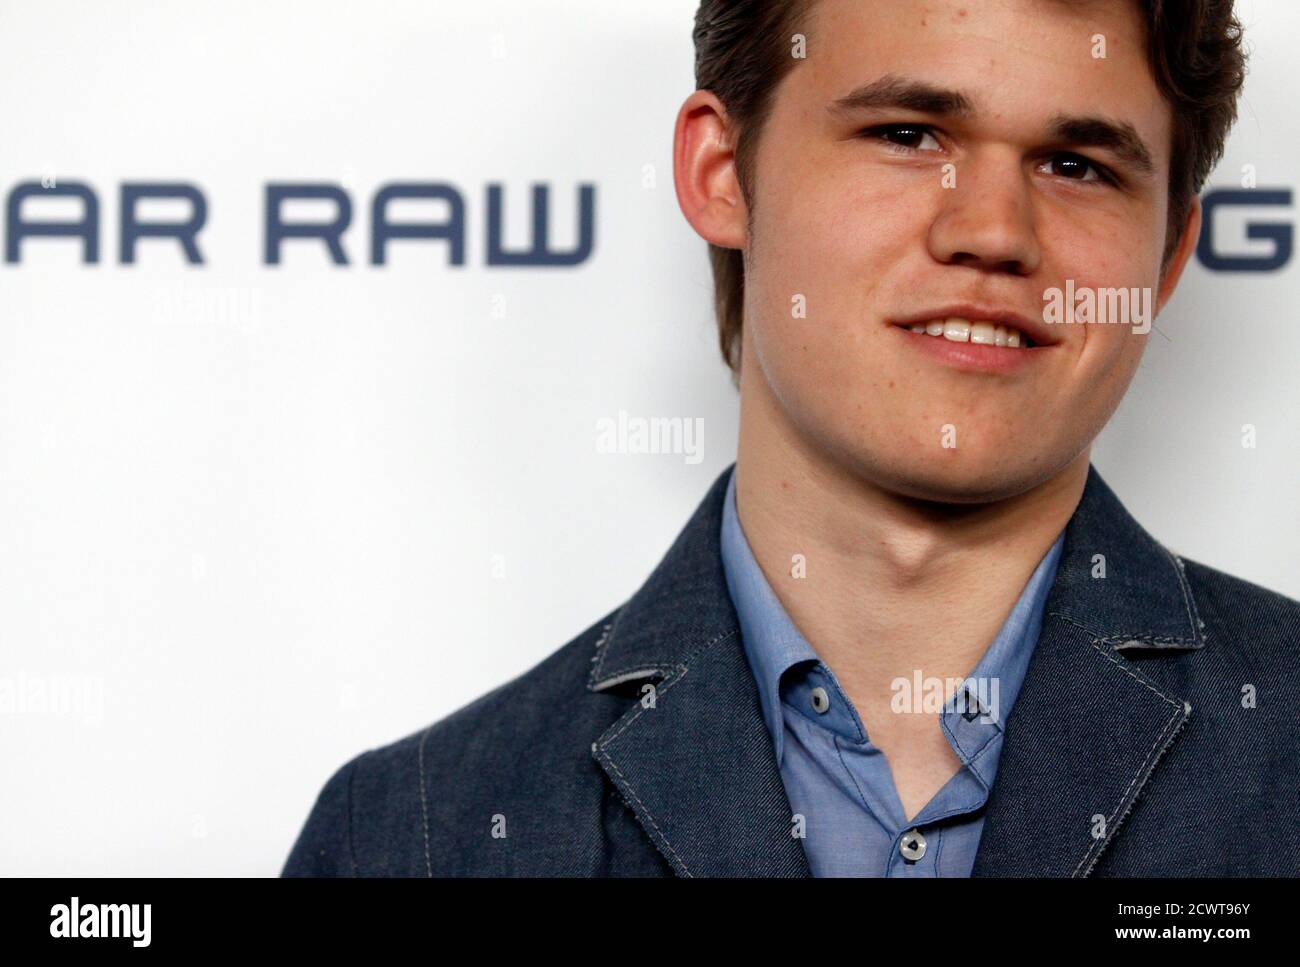 Norwegian chess champion Magnus Carlsen arrives at the G-Star RAW  Spring/Summer 2011 collection during New York Fashion Week, September 14th  2010. REUTERS/Eric Thayer (UNITED STATES - Tags: FASHION Stock Photo - Alamy